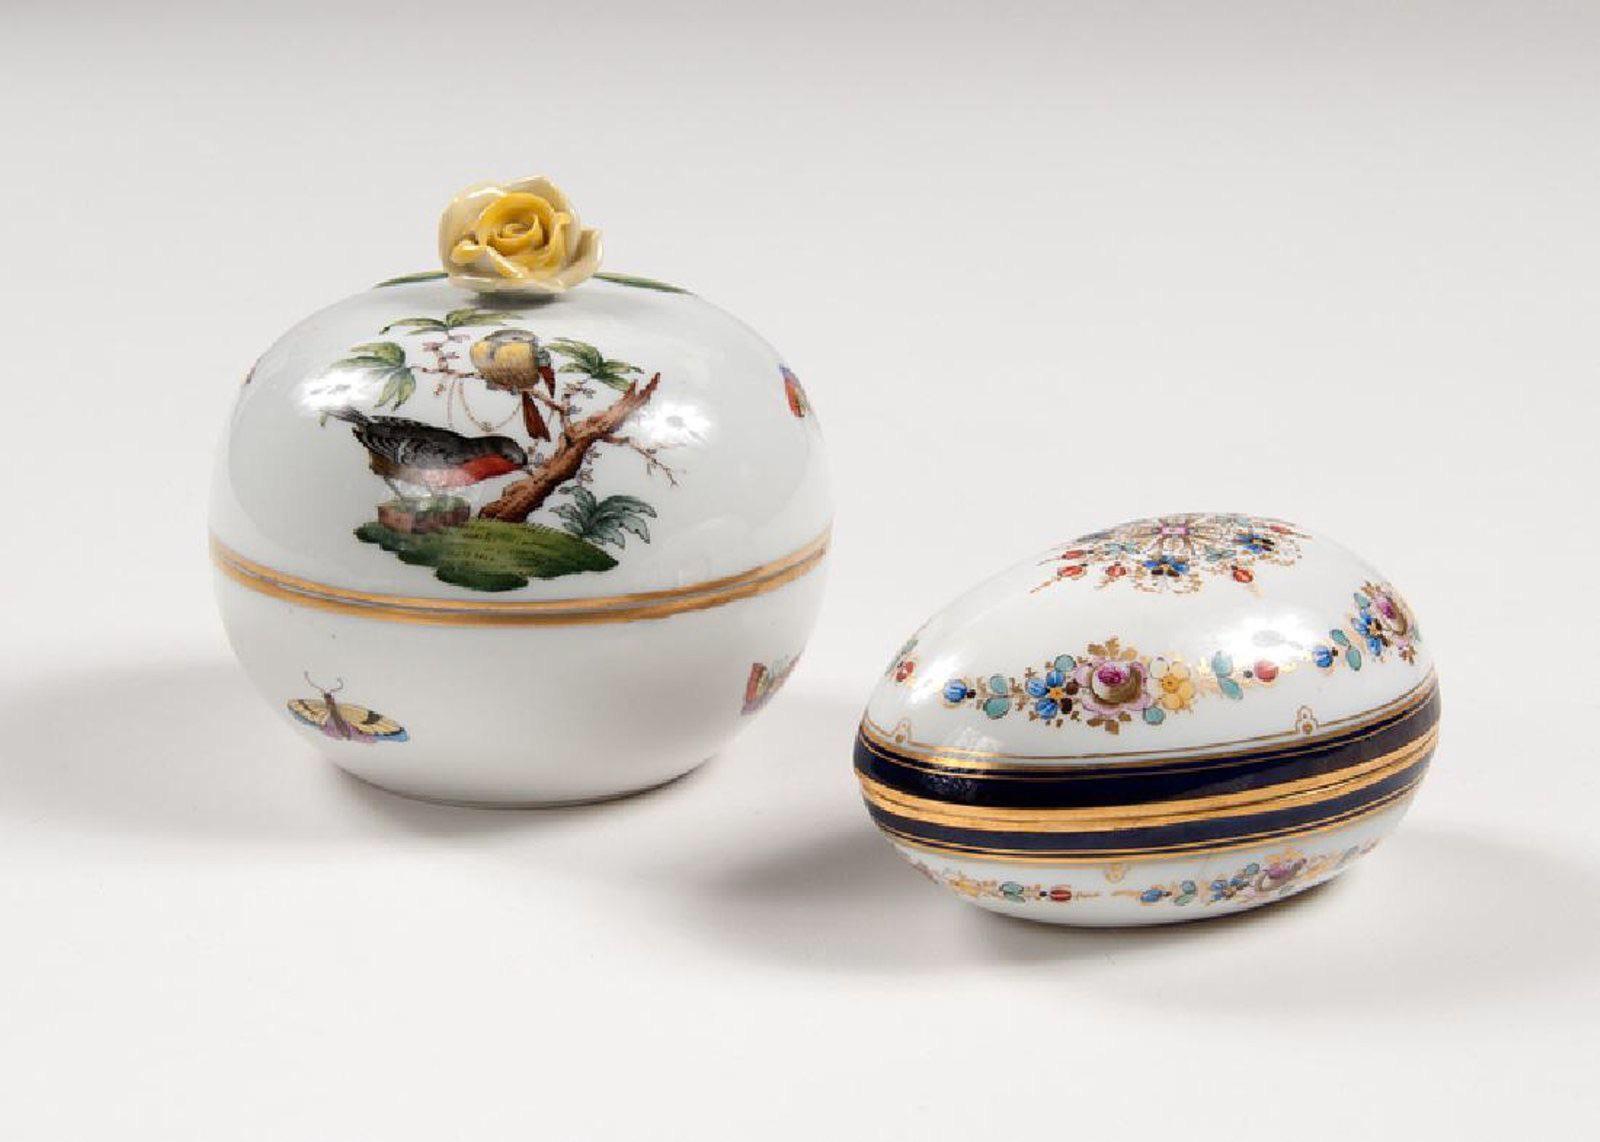 Vintage Herend porcelain figural sugar bowl with lid, birds and bees, yellow rose detail at top. Proportions of this piece are just so graceful. One of my favorite Herend designs.


 